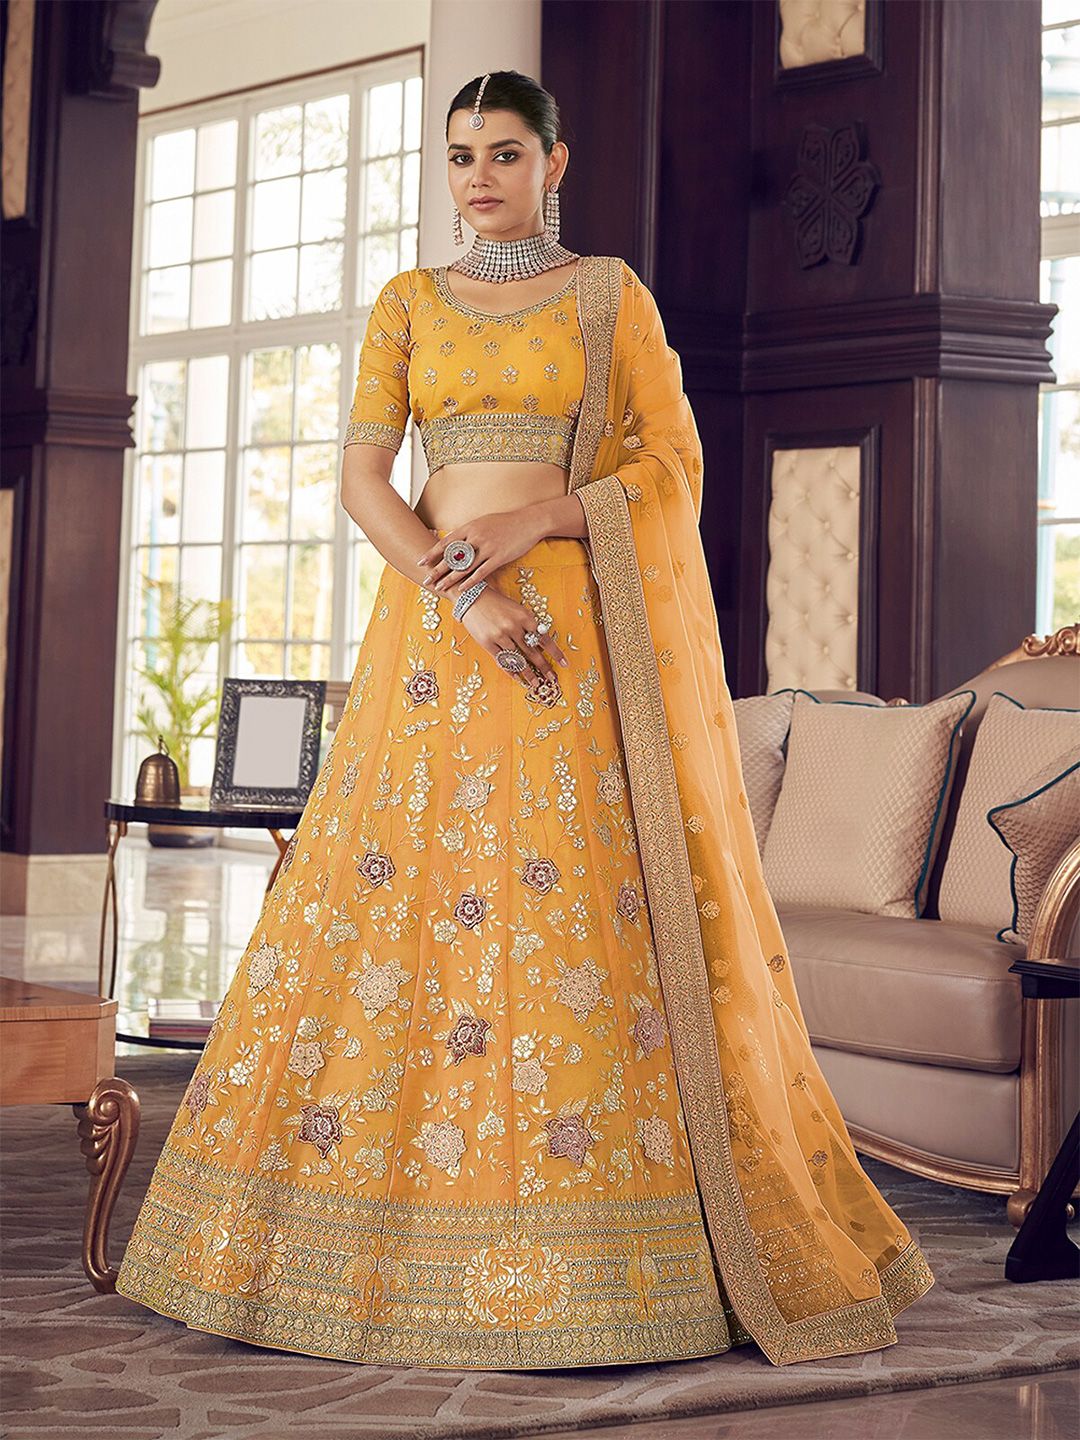 ODETTE Embroidered Thread Work Semi-Stitched Lehenga & Unstitched Blouse With Dupatta Price in India